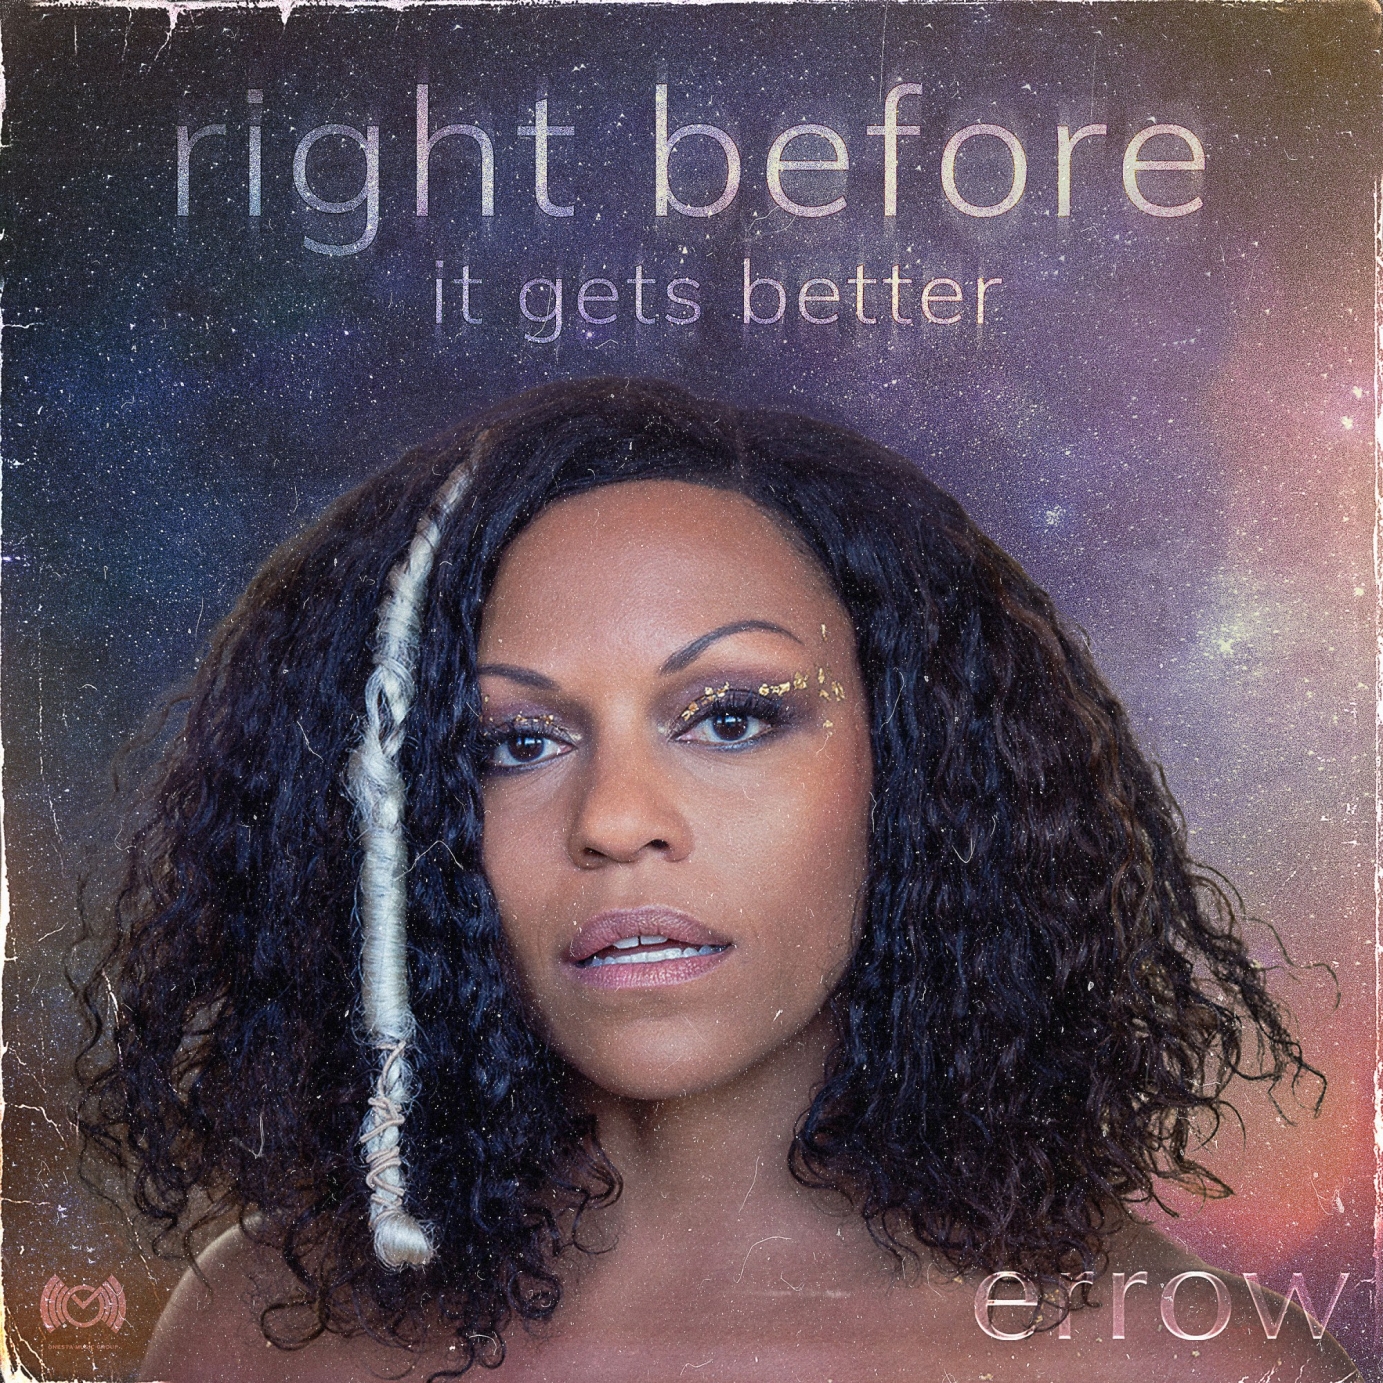 Cover Art for Errows debut Album "right before it gets better"